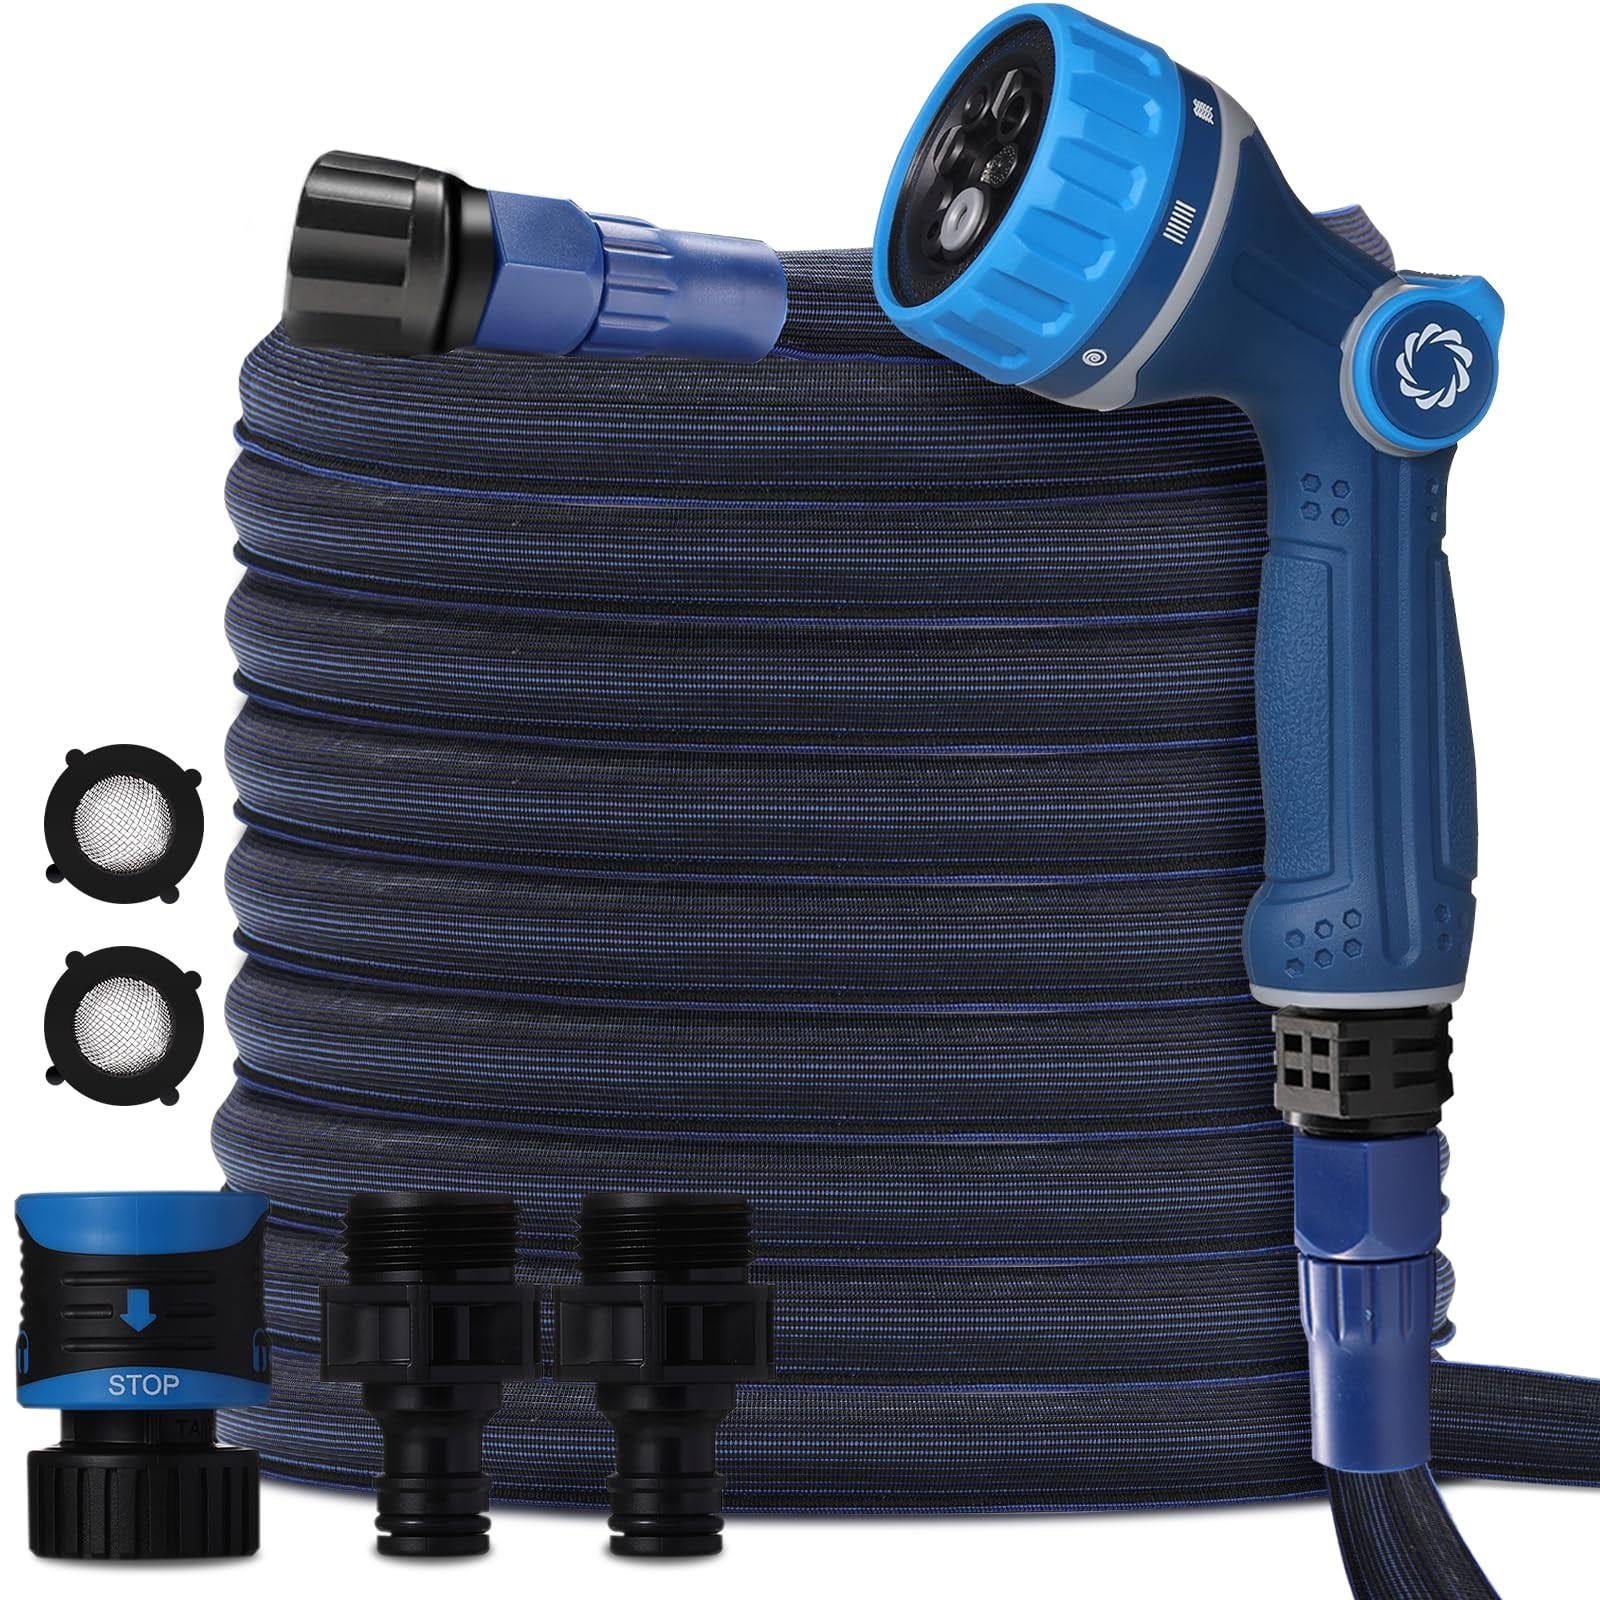 Versatile Airthereal Expandable Garden Hose with 8 Spray Patterns and Cyclone Mode | Image